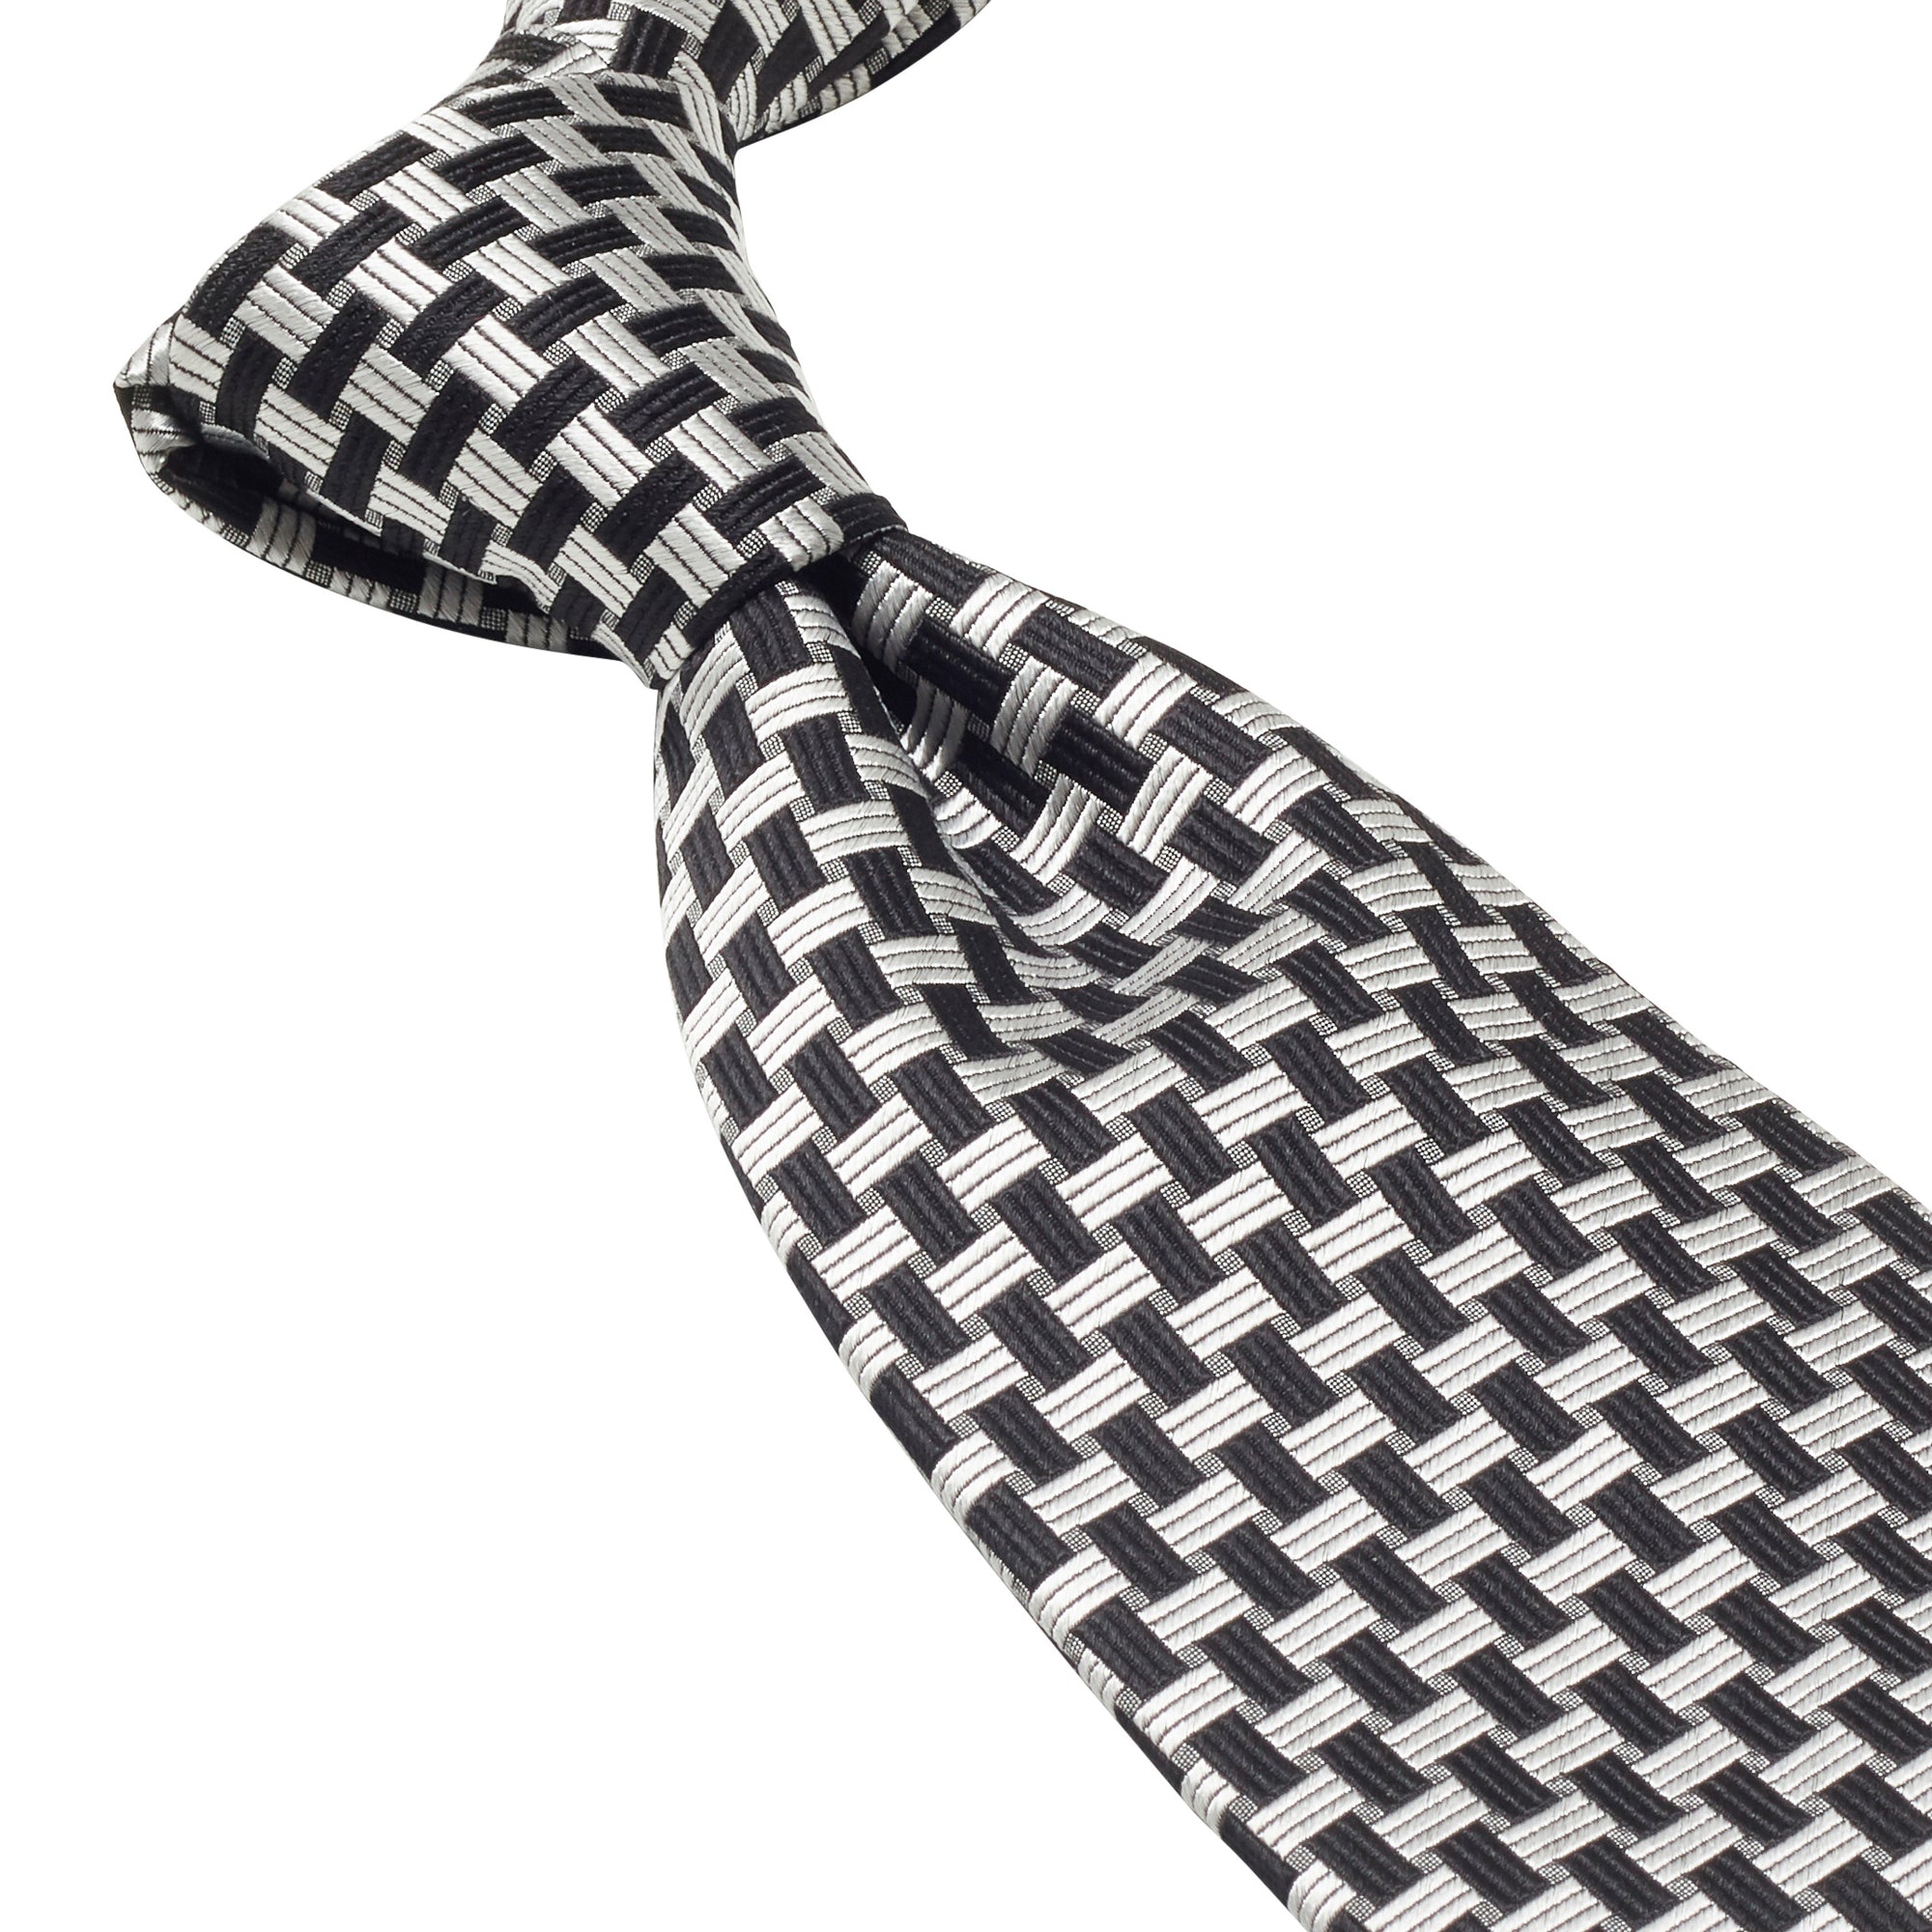 A Sovereign Grade Basket Weave Silk Tie by KirbyAllison.com on a white background.